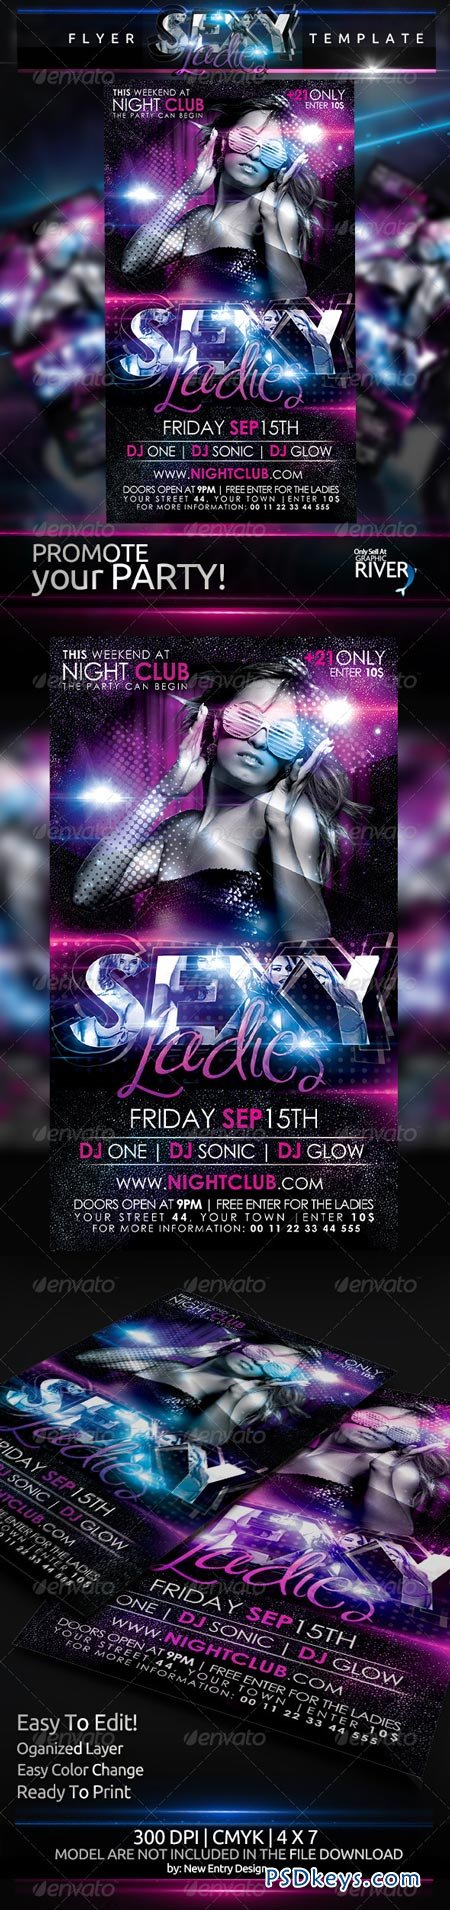 Sexy Ladies Flyer Template 5329172